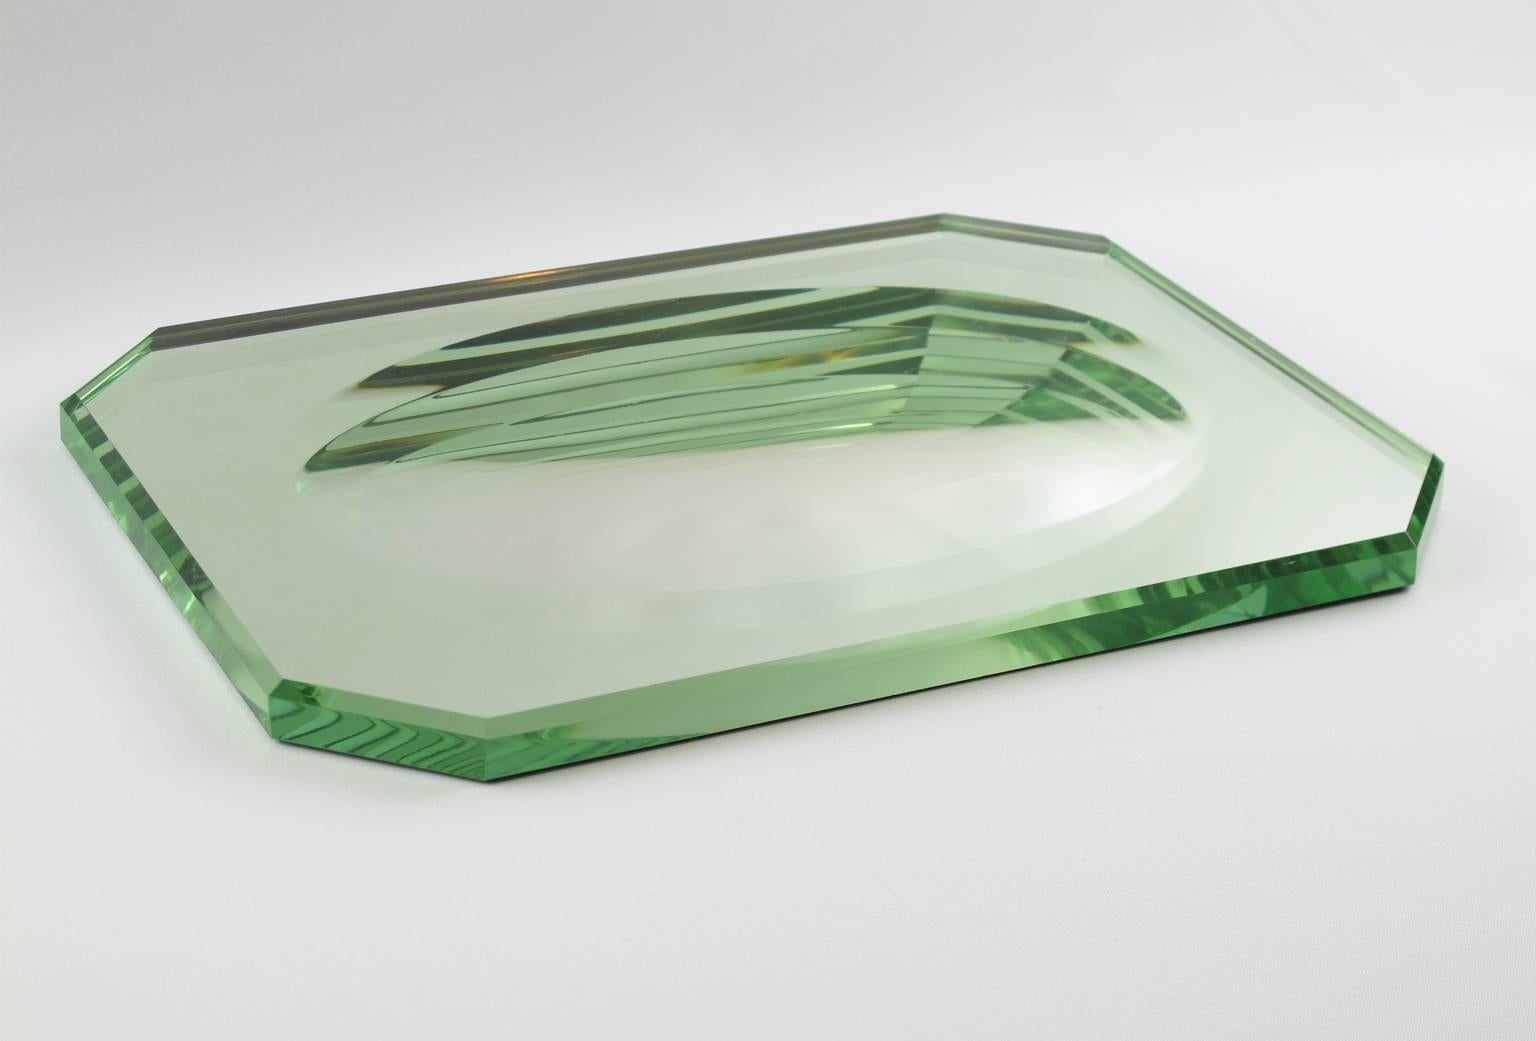 Etched French Art Deco Mirrored Glass Tray Platter Centrepiece by Jean Luce, 1930s